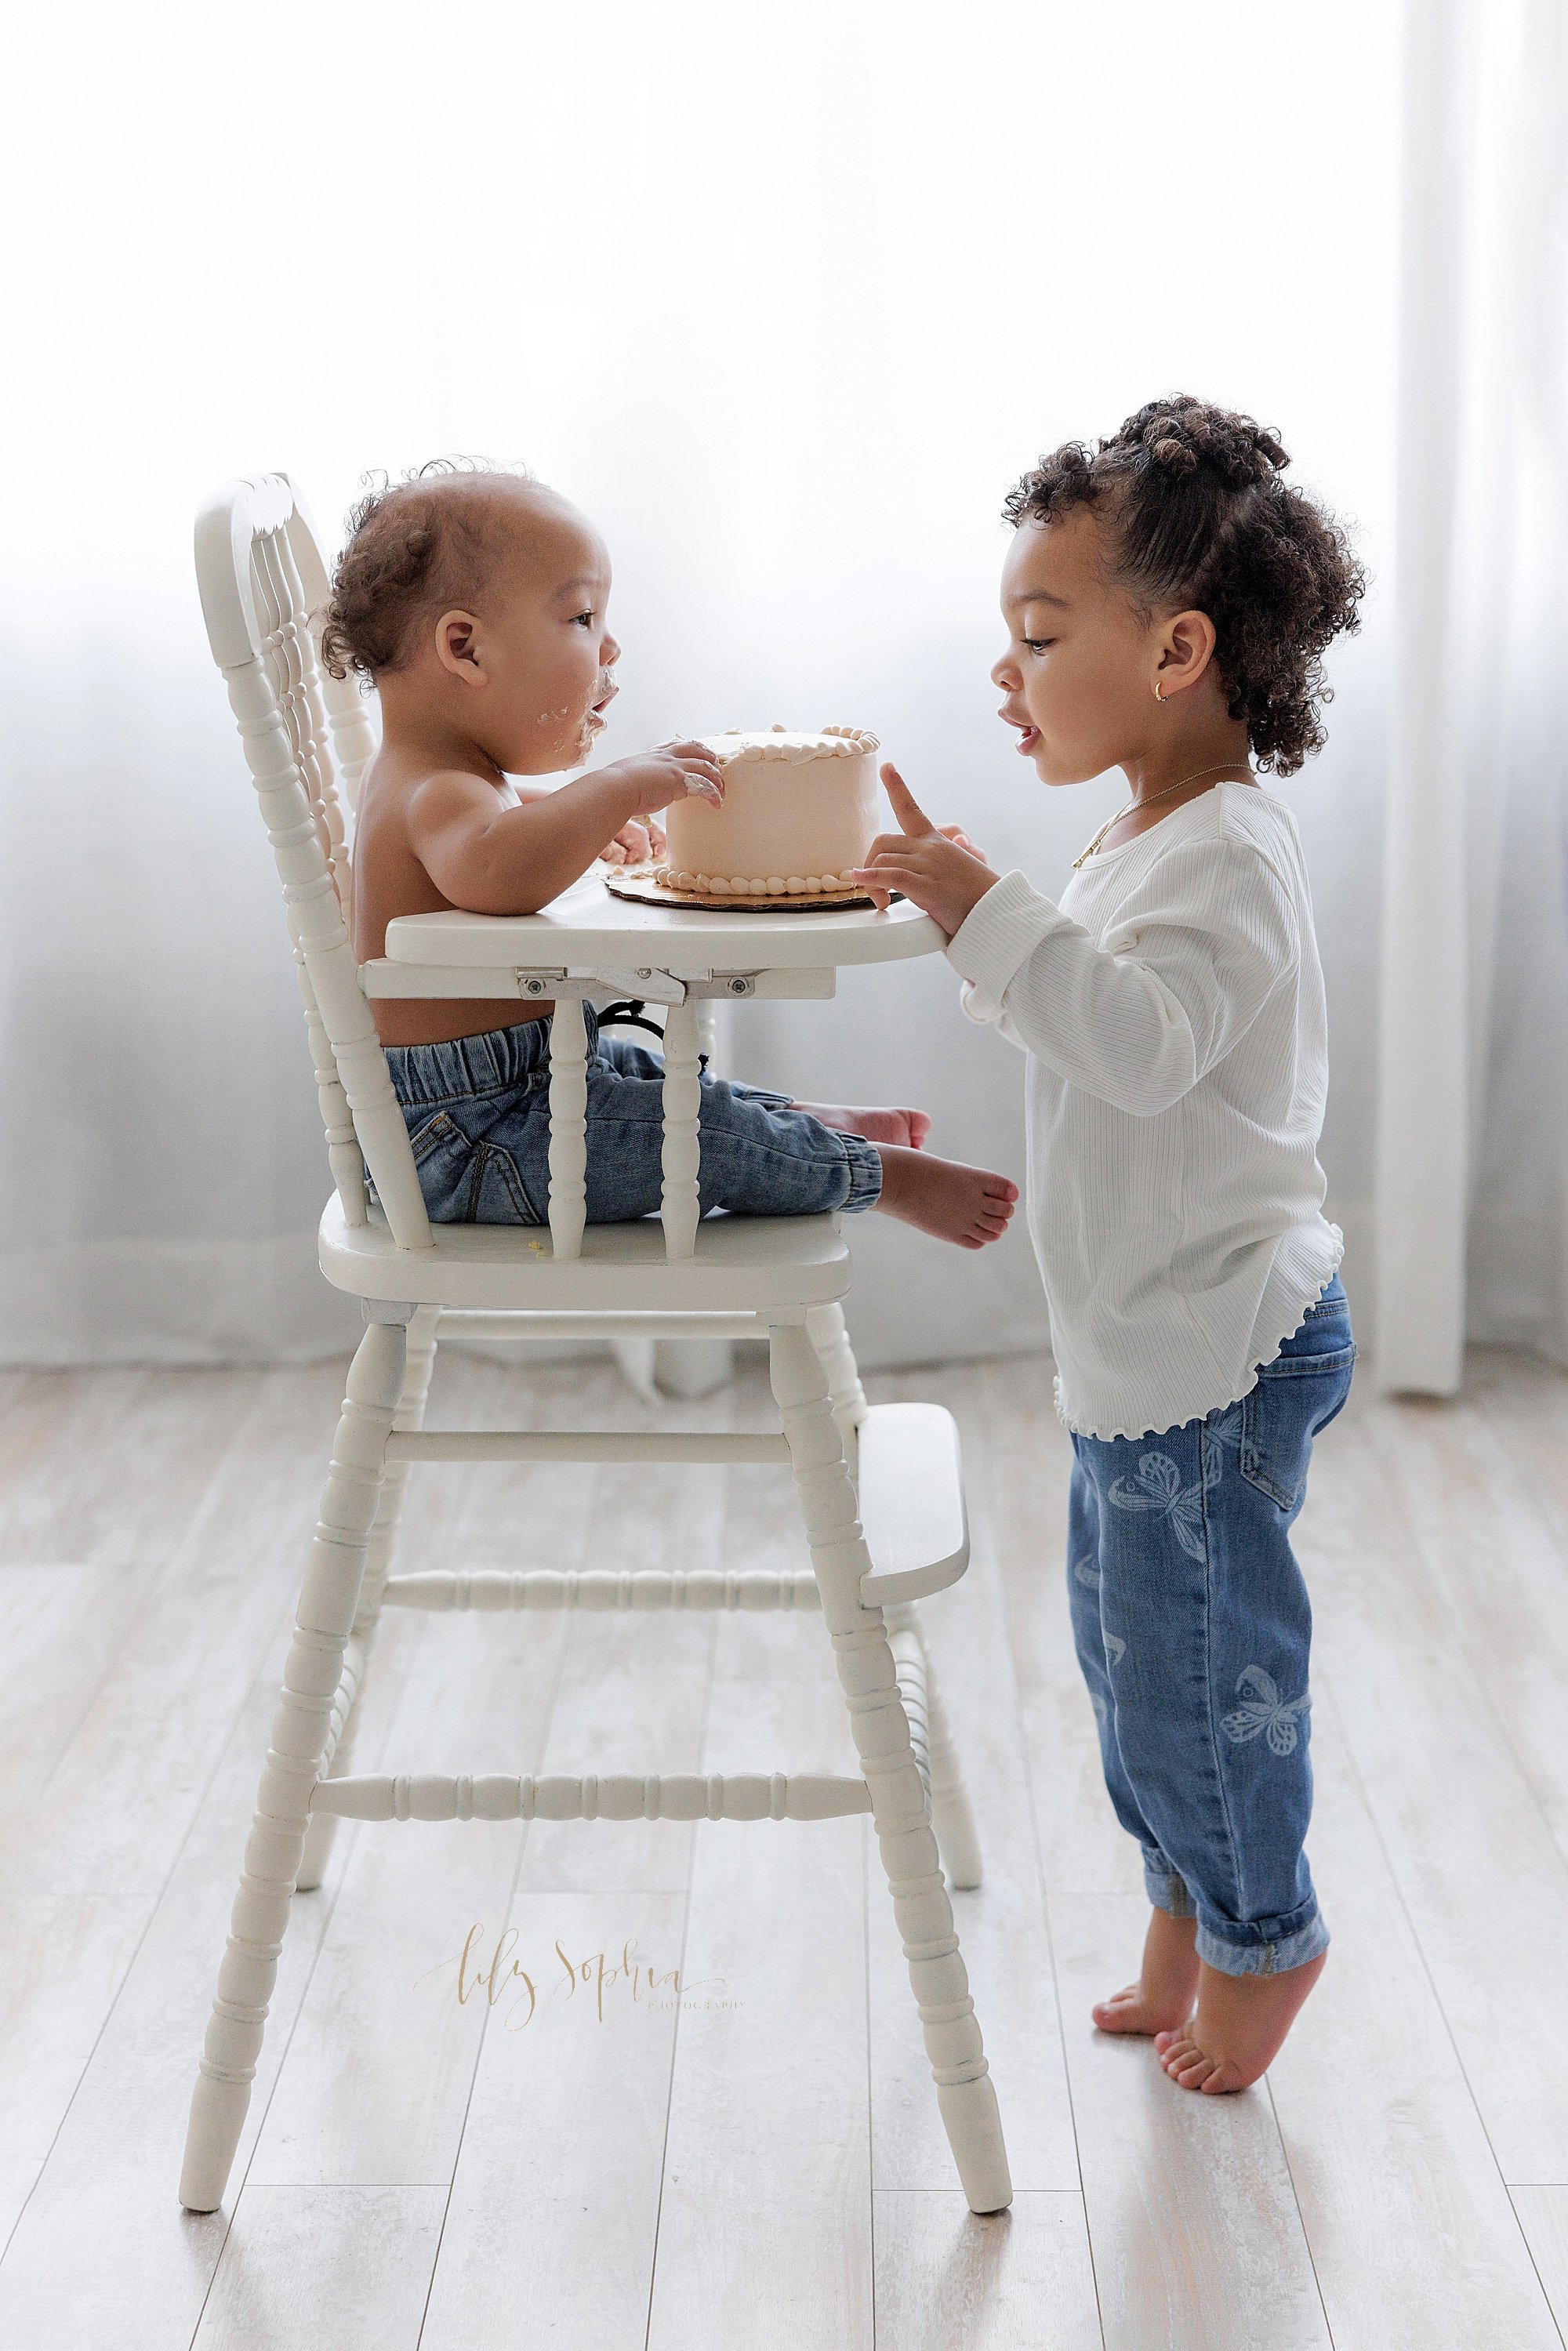  Sibling first birthday smash cake photo of a one year old boy sitting in an antique high chair with his smash cake on the tray as his sister stands on tiptoe in front of the high chair to give him instructions taken in a photography studio in front 